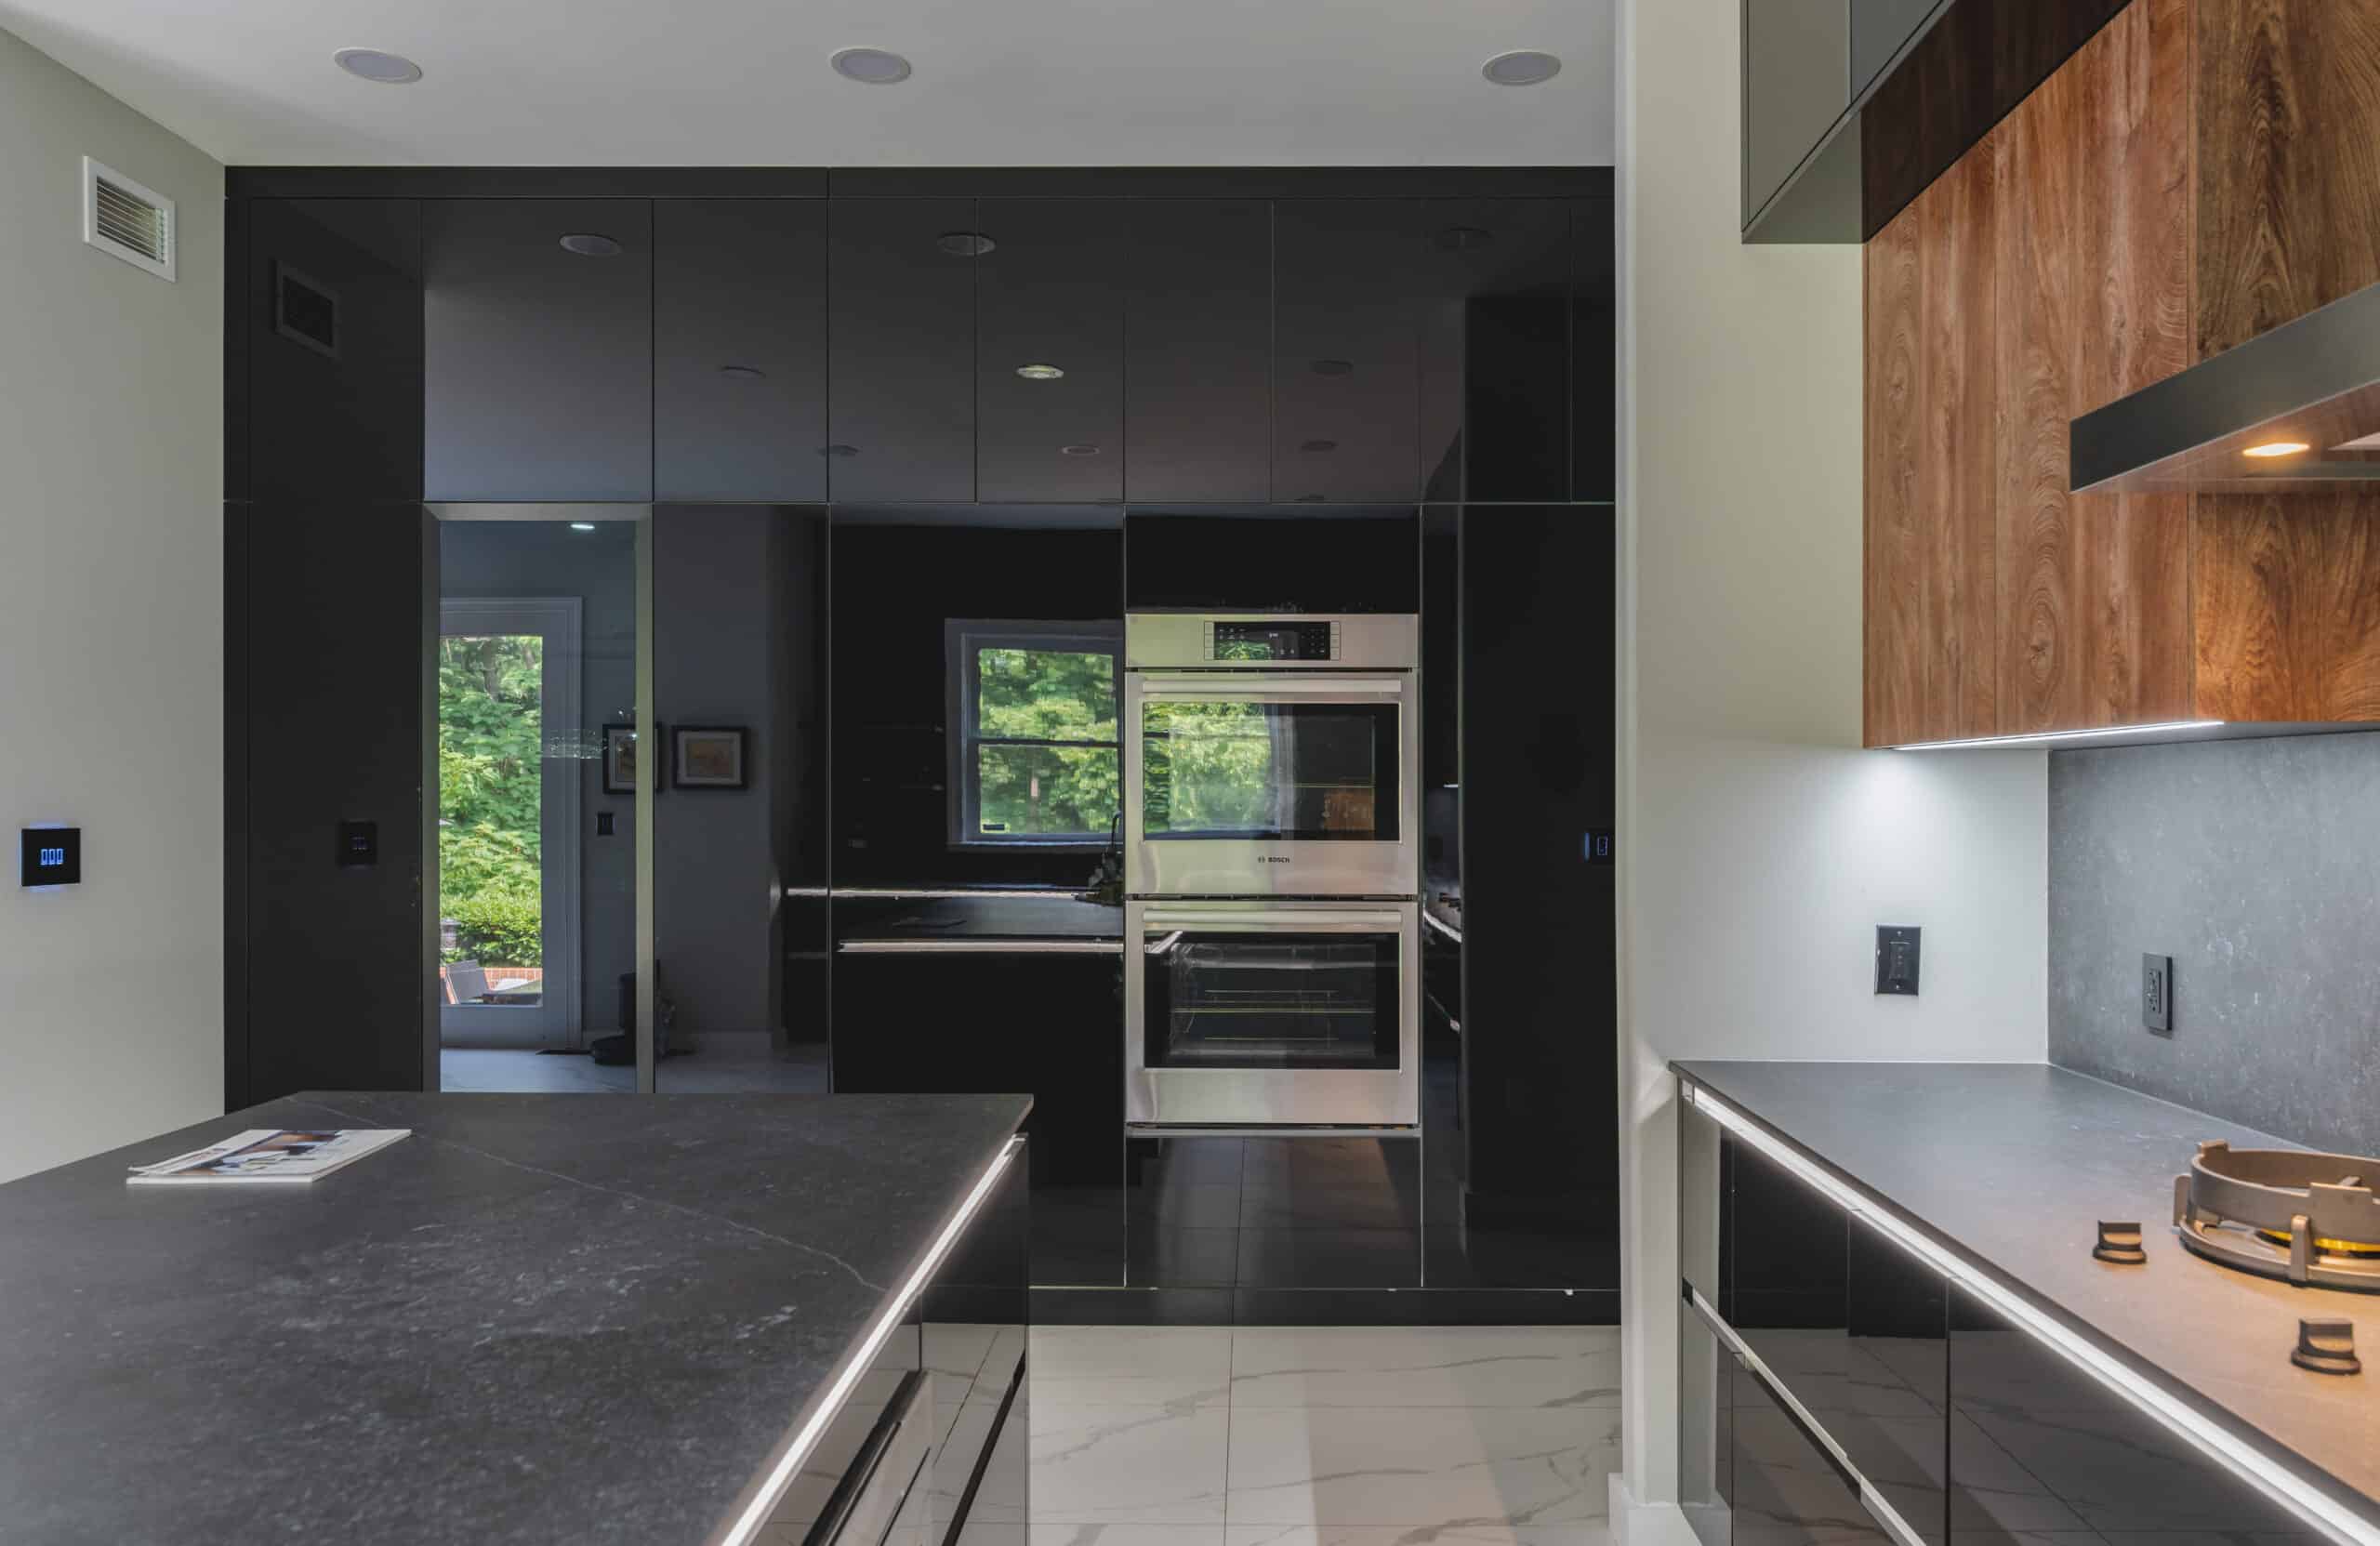 A contemporary kitchen featuring sleek black cabinets and countertops